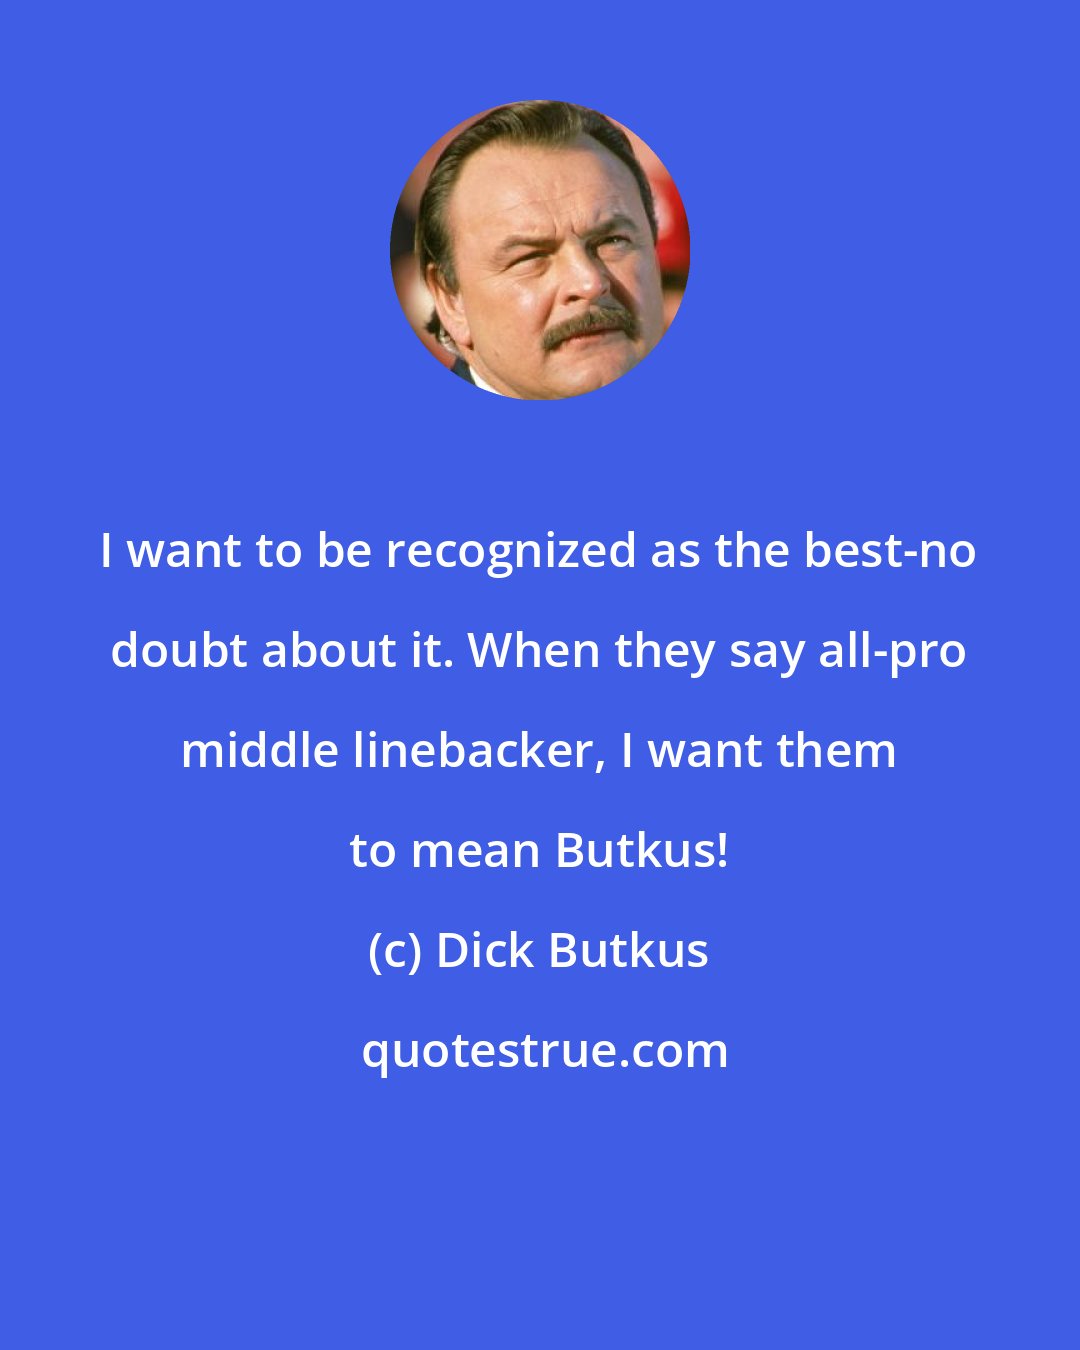 Dick Butkus: I want to be recognized as the best-no doubt about it. When they say all-pro middle linebacker, I want them to mean Butkus!